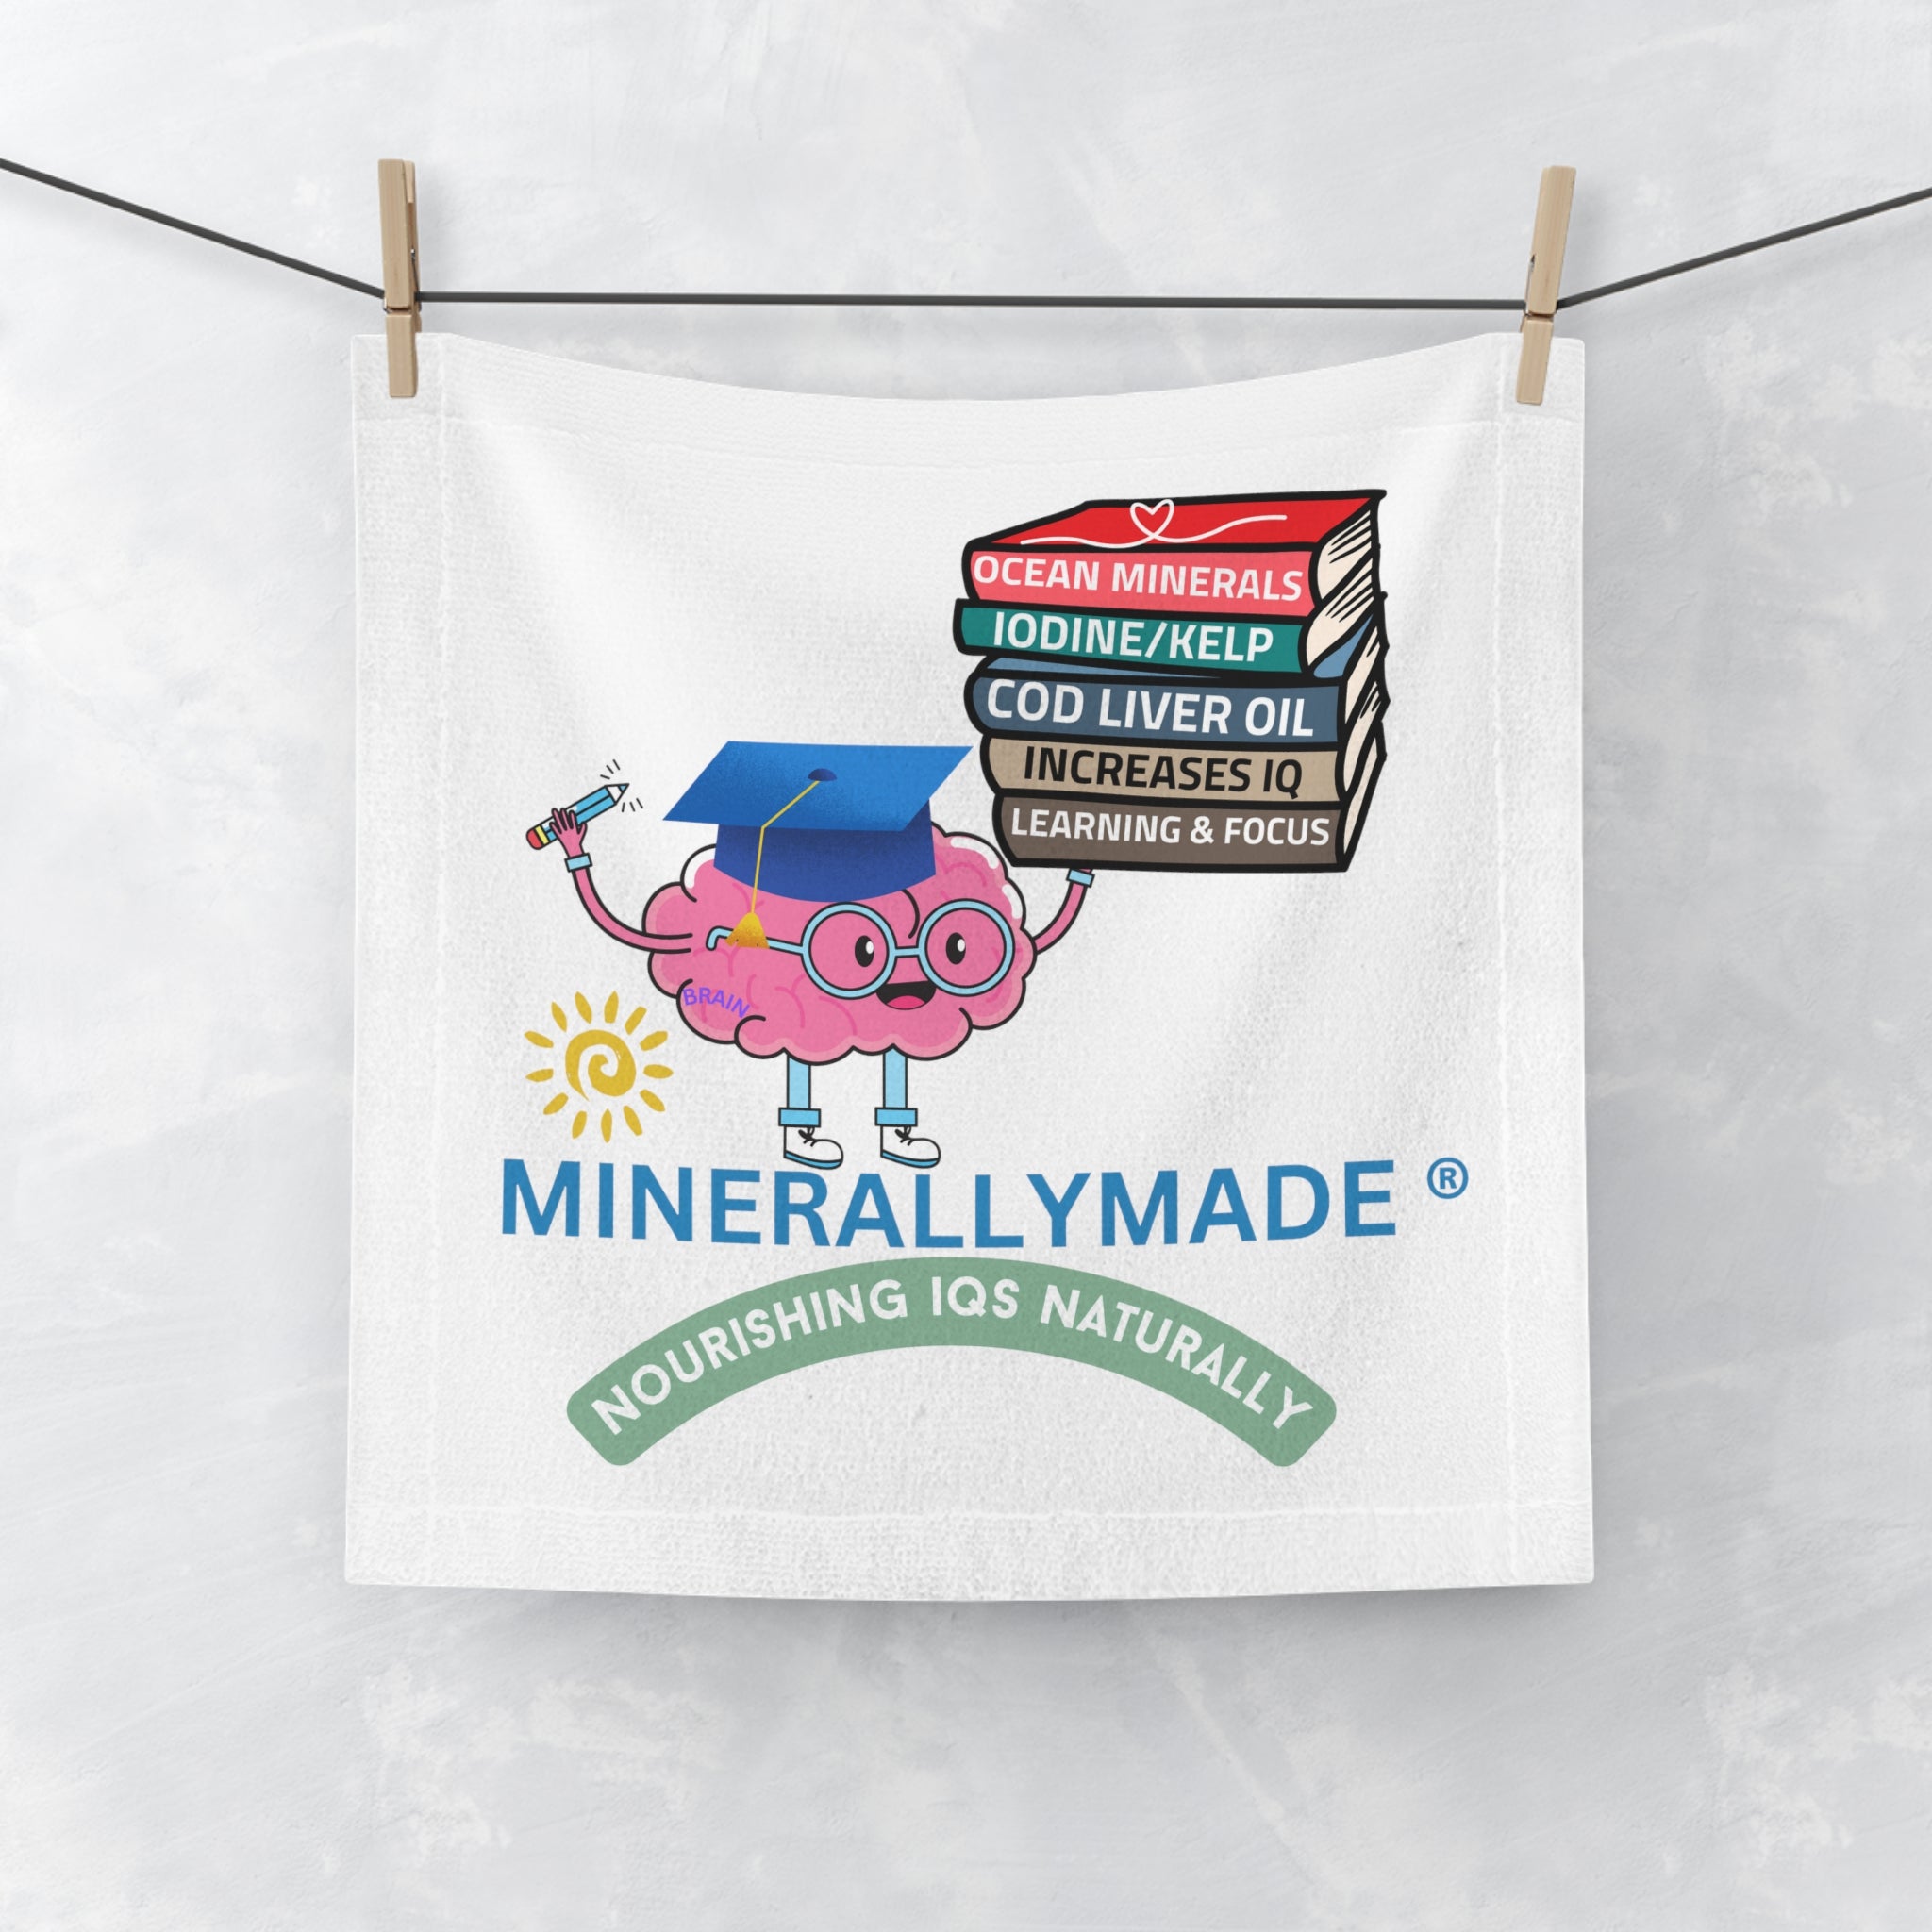 Minerallymade | Nourishing IQs Naturally | Face Towel